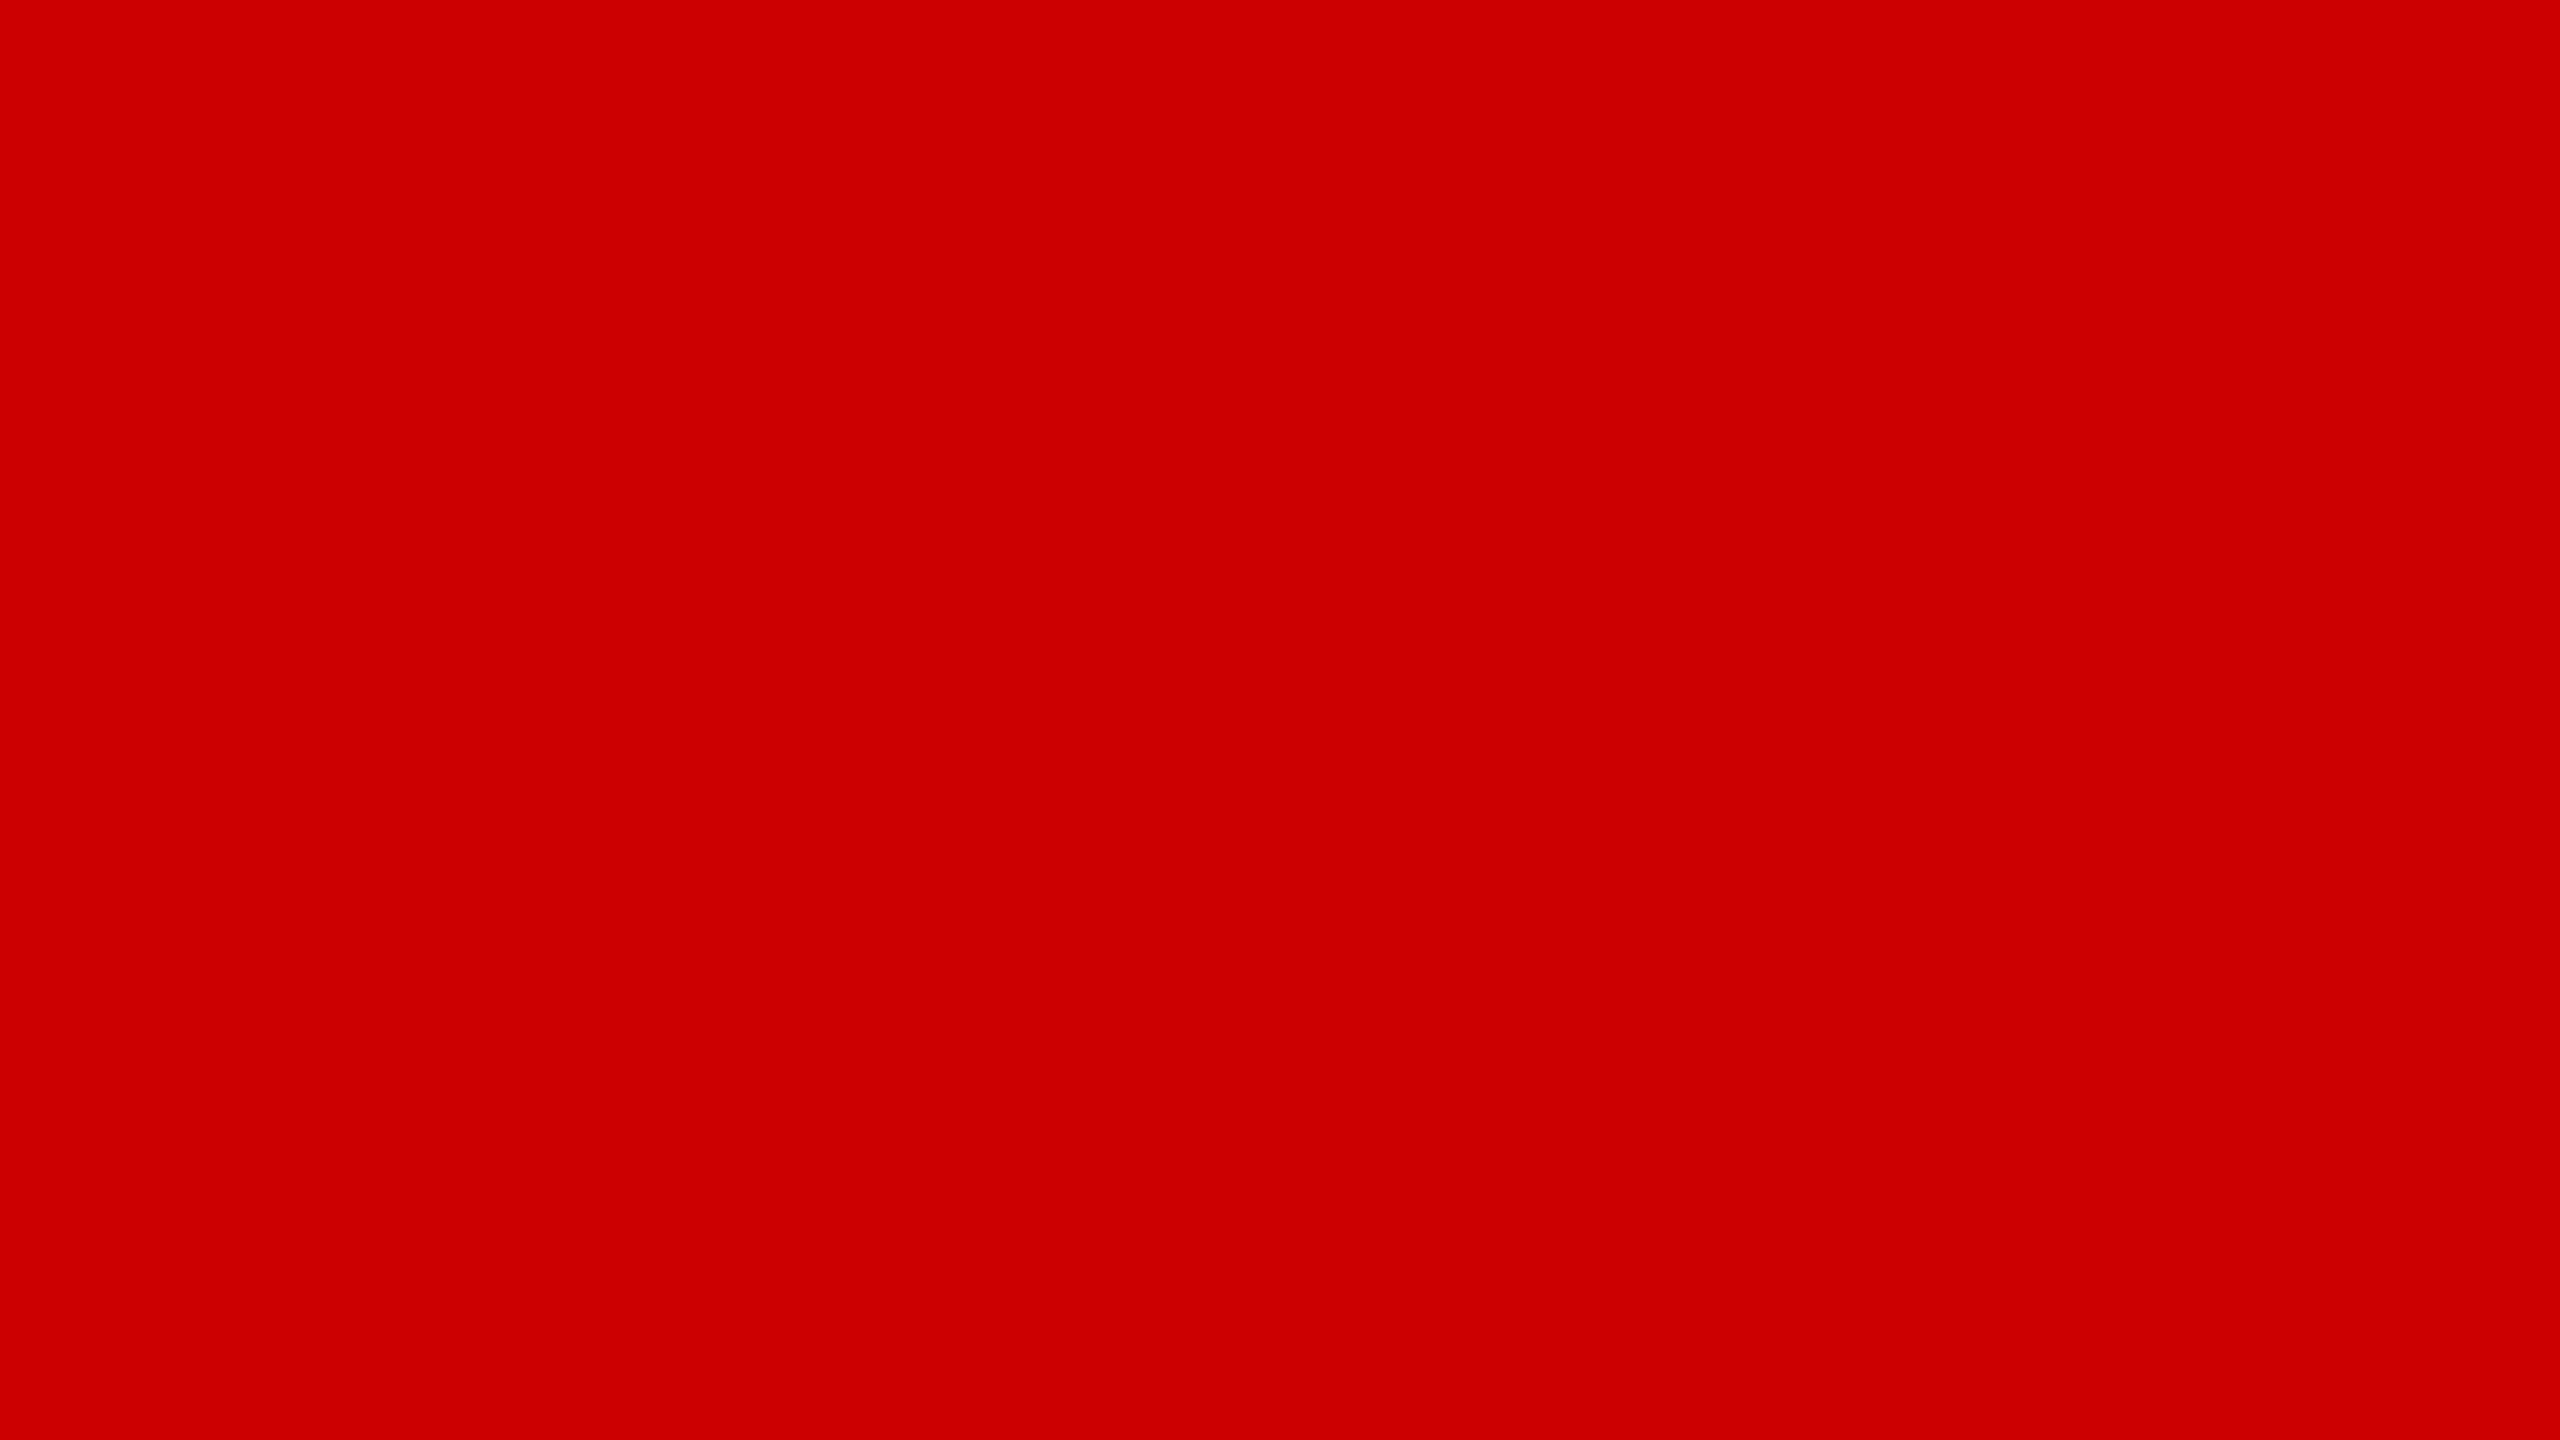 2560x1440 Boston University Red Solid Color Background